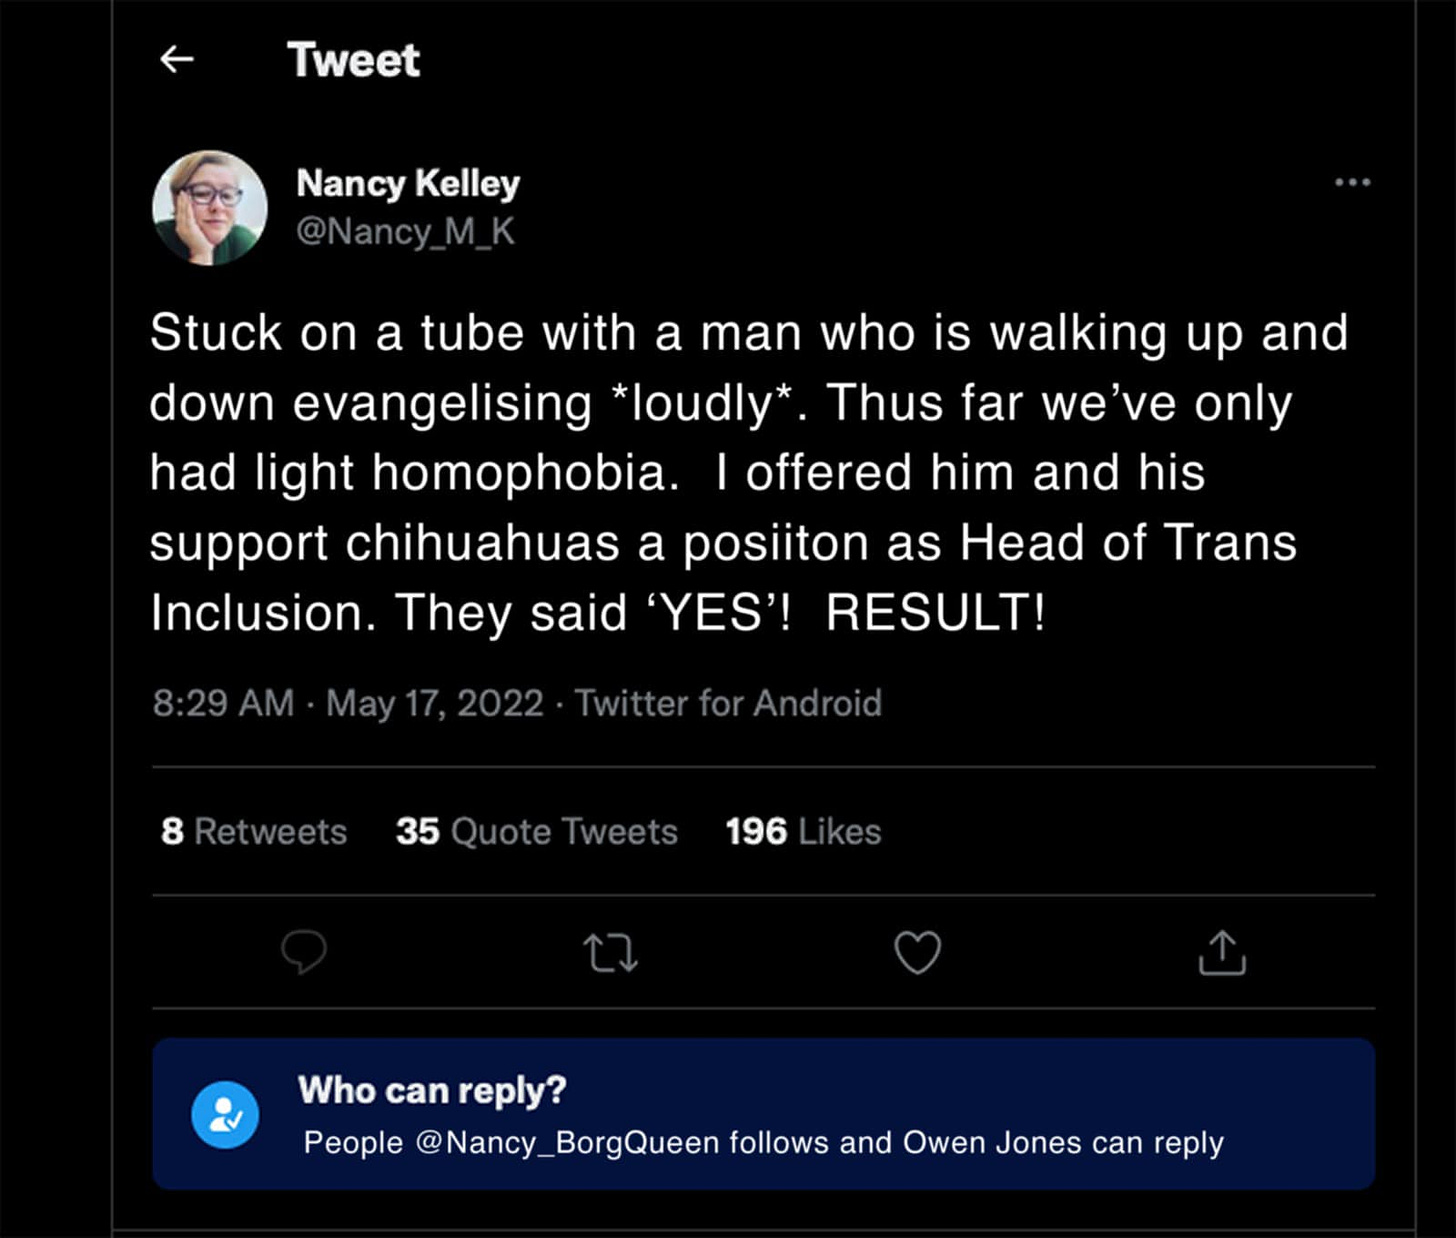 May be a Twitter screenshot of 1 person and text that says 'Tweet Nancy Kelley @Nancy Stuck on a tube with a man who is walking up and down evangelising *loudly* Thus far we've only had light homophobia. offered him and his support chihuahuas a posiiton as Head of Trans Inclusion. They said YES'! RESULT! 8 Retweets 35 Quote Tweets 196 kes Who can reply? People y_BorgQueen follows and Owen Jones can reply'